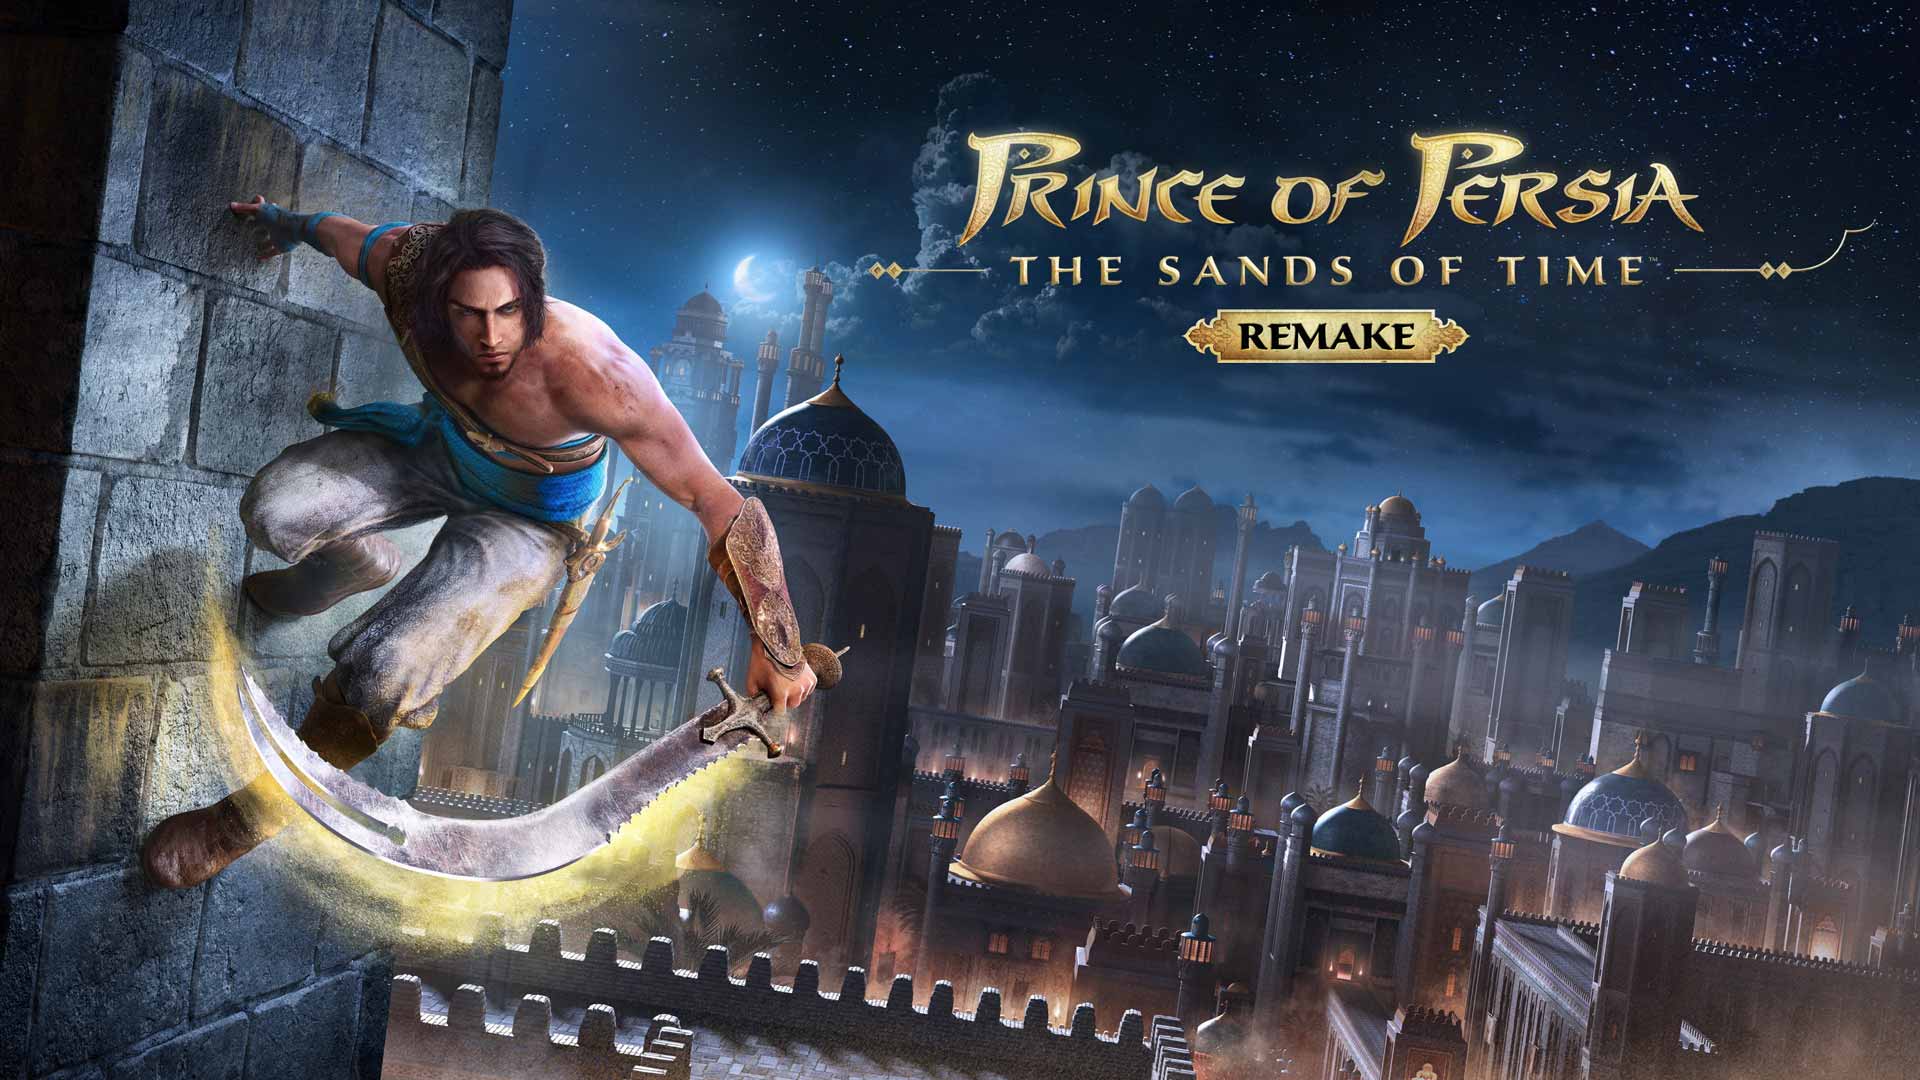 prince-of-persia-the-sands-of-time-remake-achievements-list-revealed-game-freaks-365